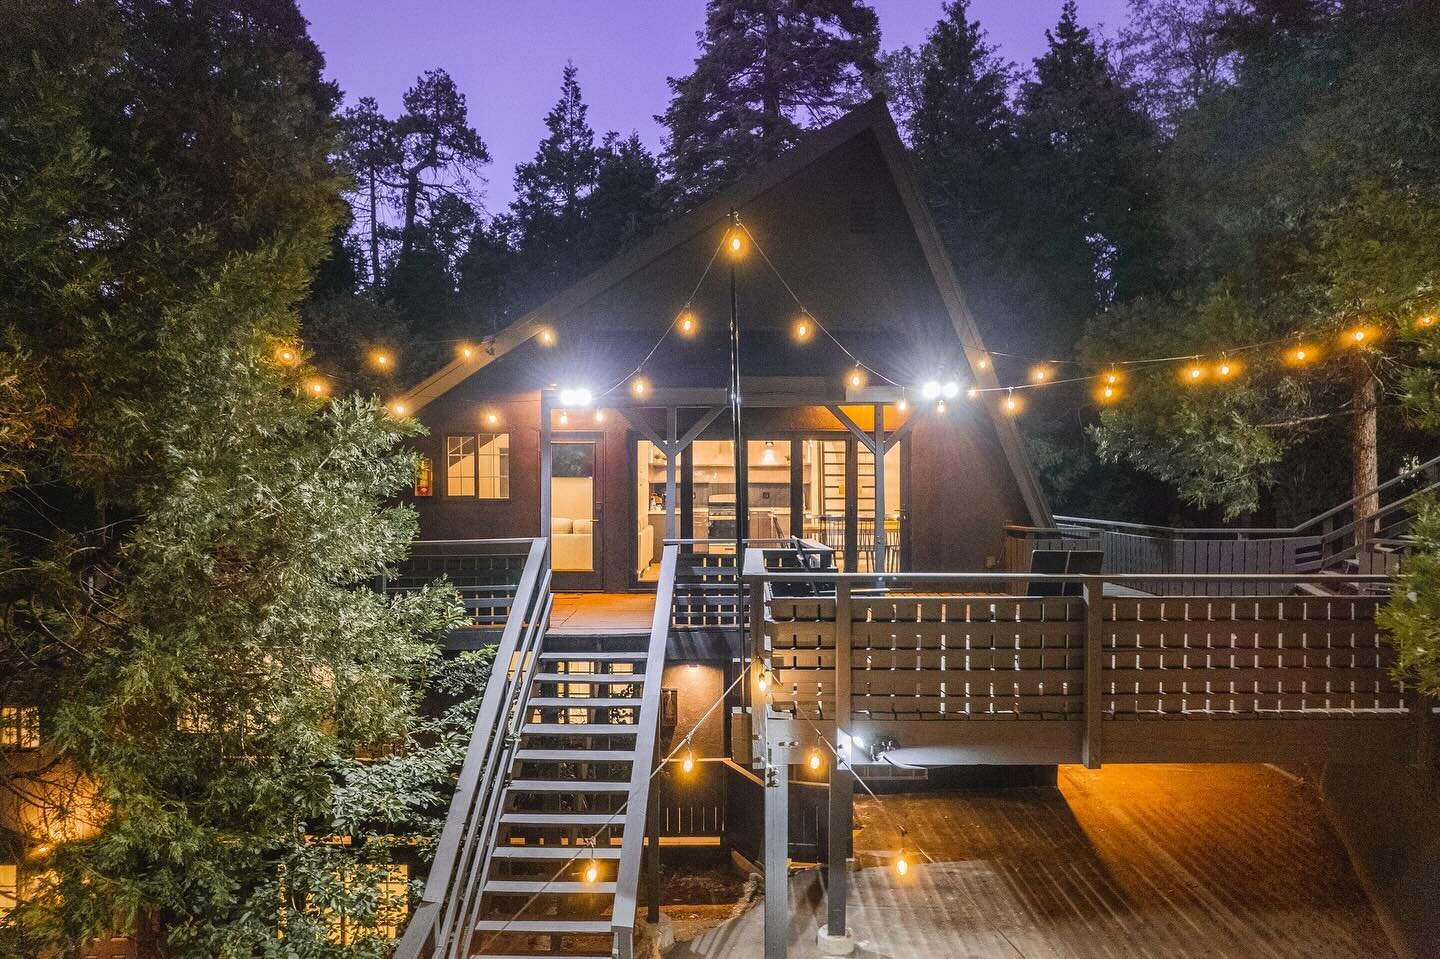 Looking for a holiday getaway? Come to Lake Arrowhead, CA and stay at The Kingsley Hotel.

Whether it&rsquo;s a girls trip, a family reunion, or a much needed break from the city, The Kingsley is here to take care of you.

Located in Lake Arrowhead, 